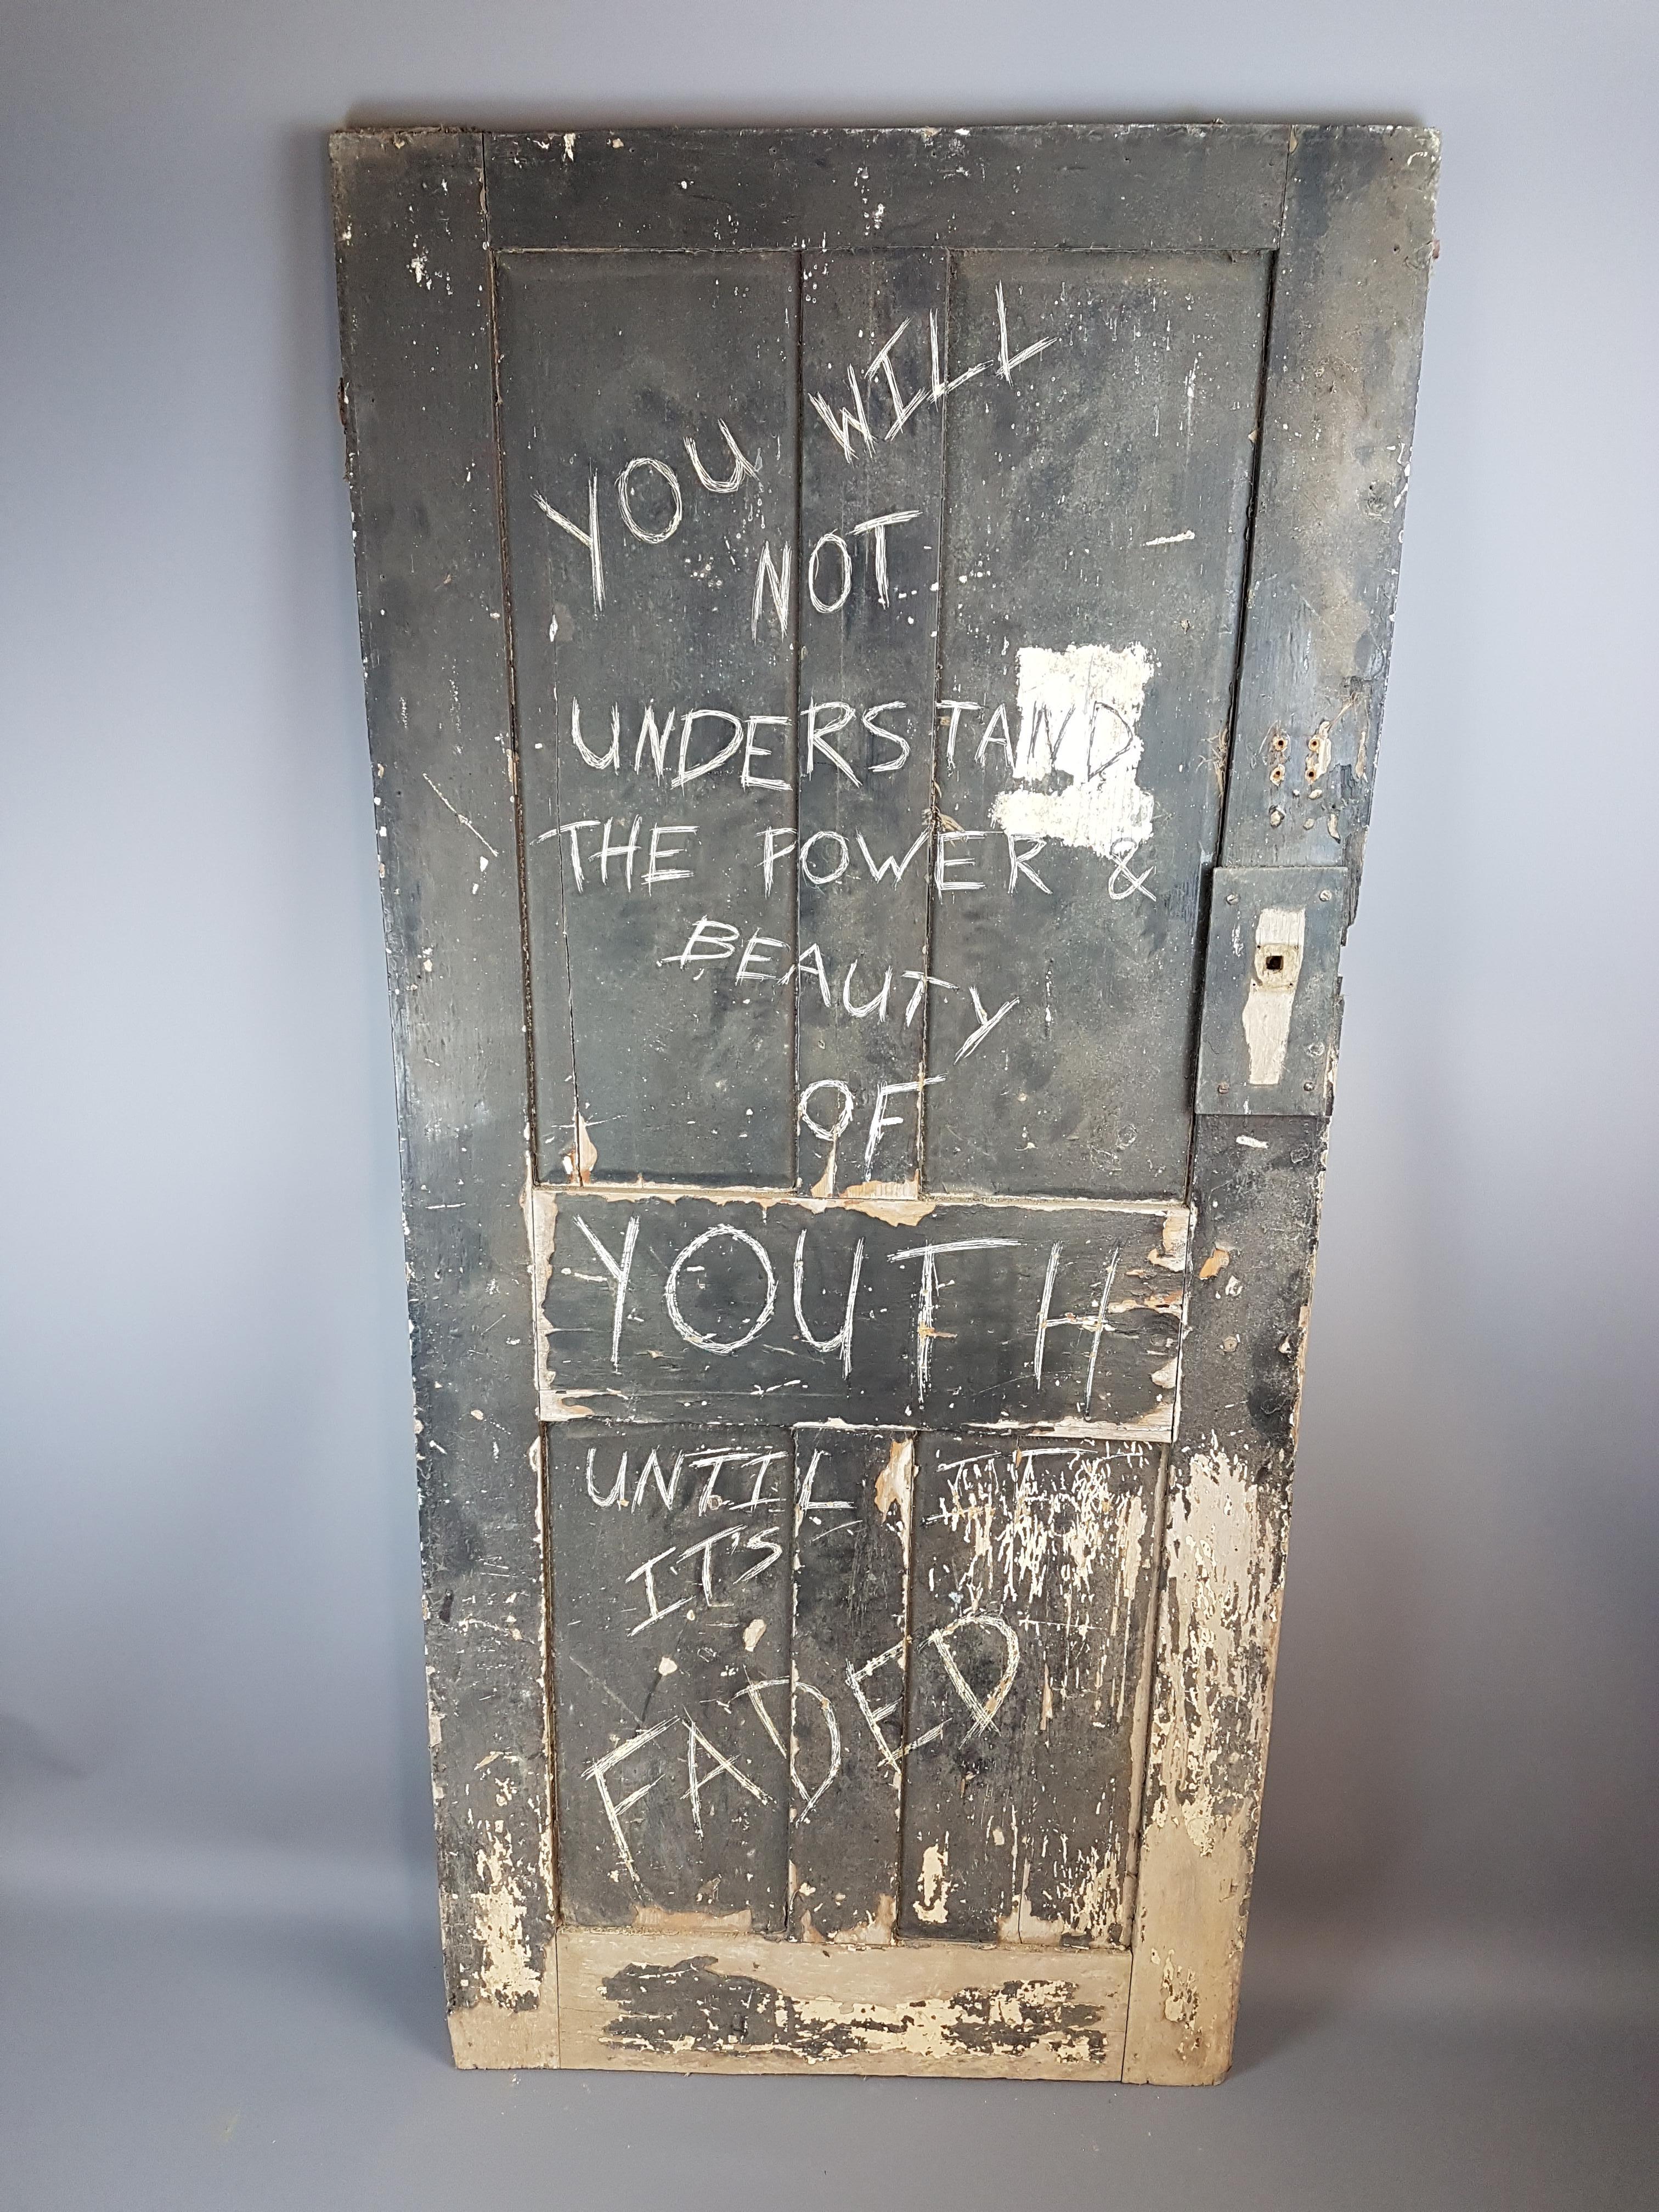 A very cool, decorative, faded and neglected 19th century painted door with later scratched in graffiti art wording. The door was salvaged from an outbuilding of house set for demolition. A very unique decorative wall art item which would look great